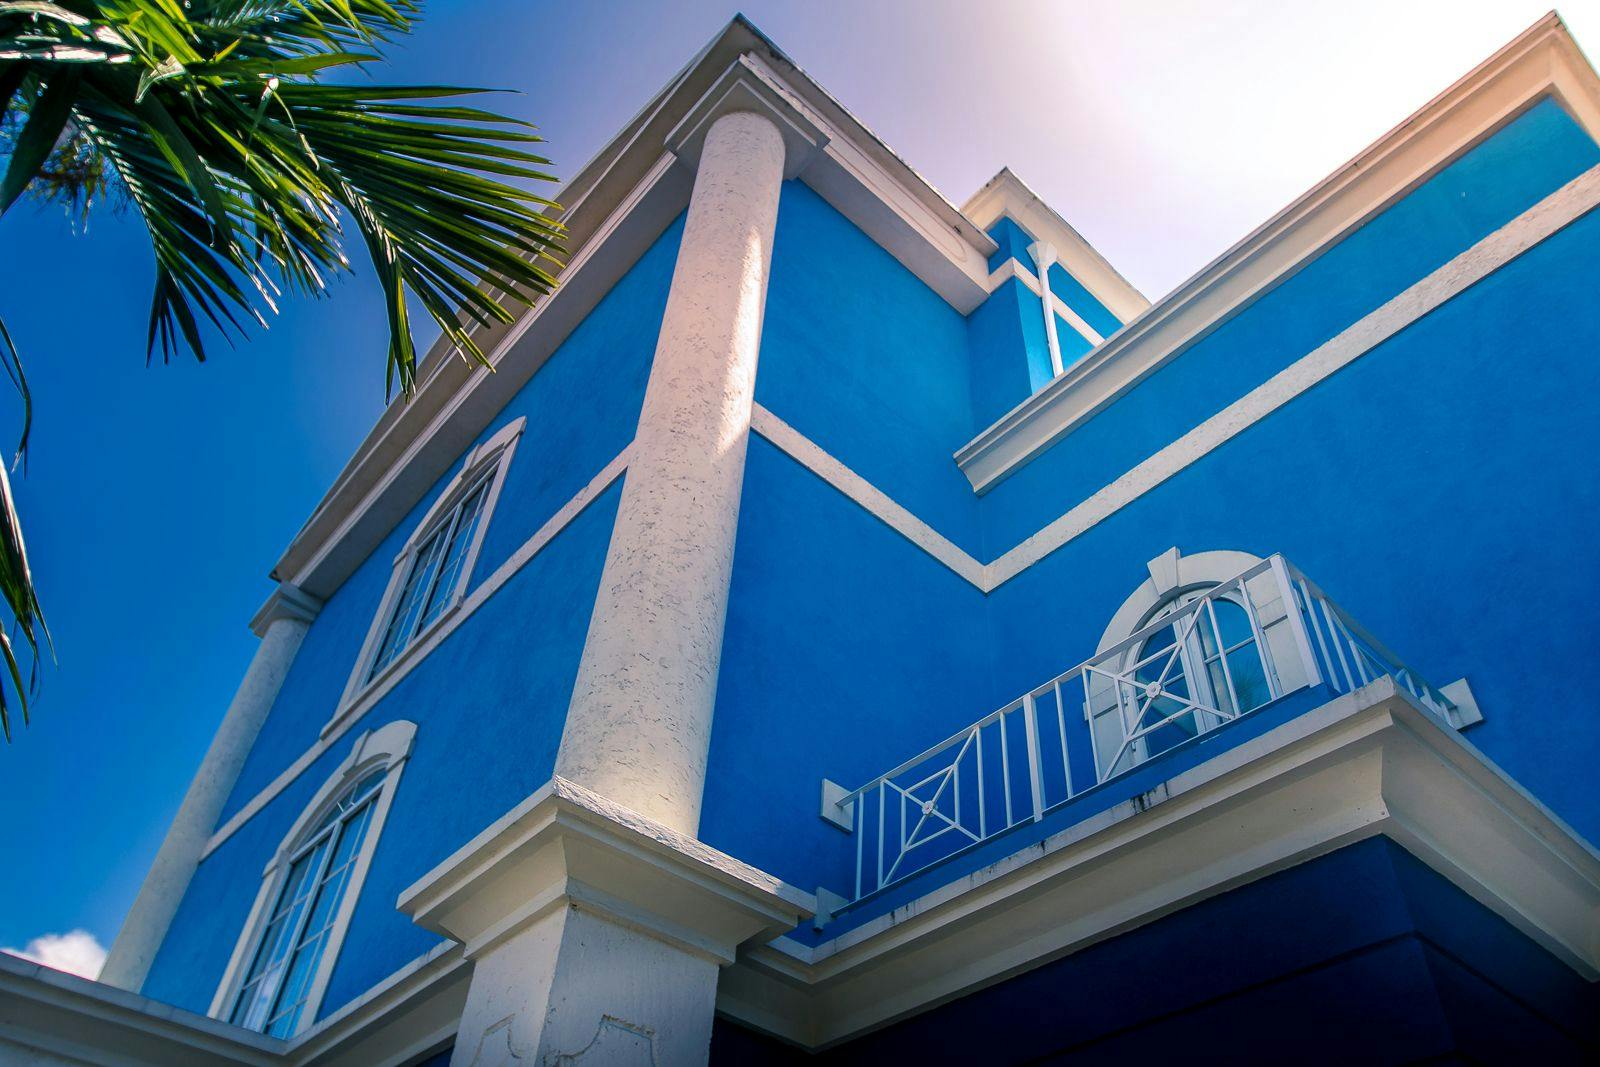 A blue painted building in Holetown Barbados